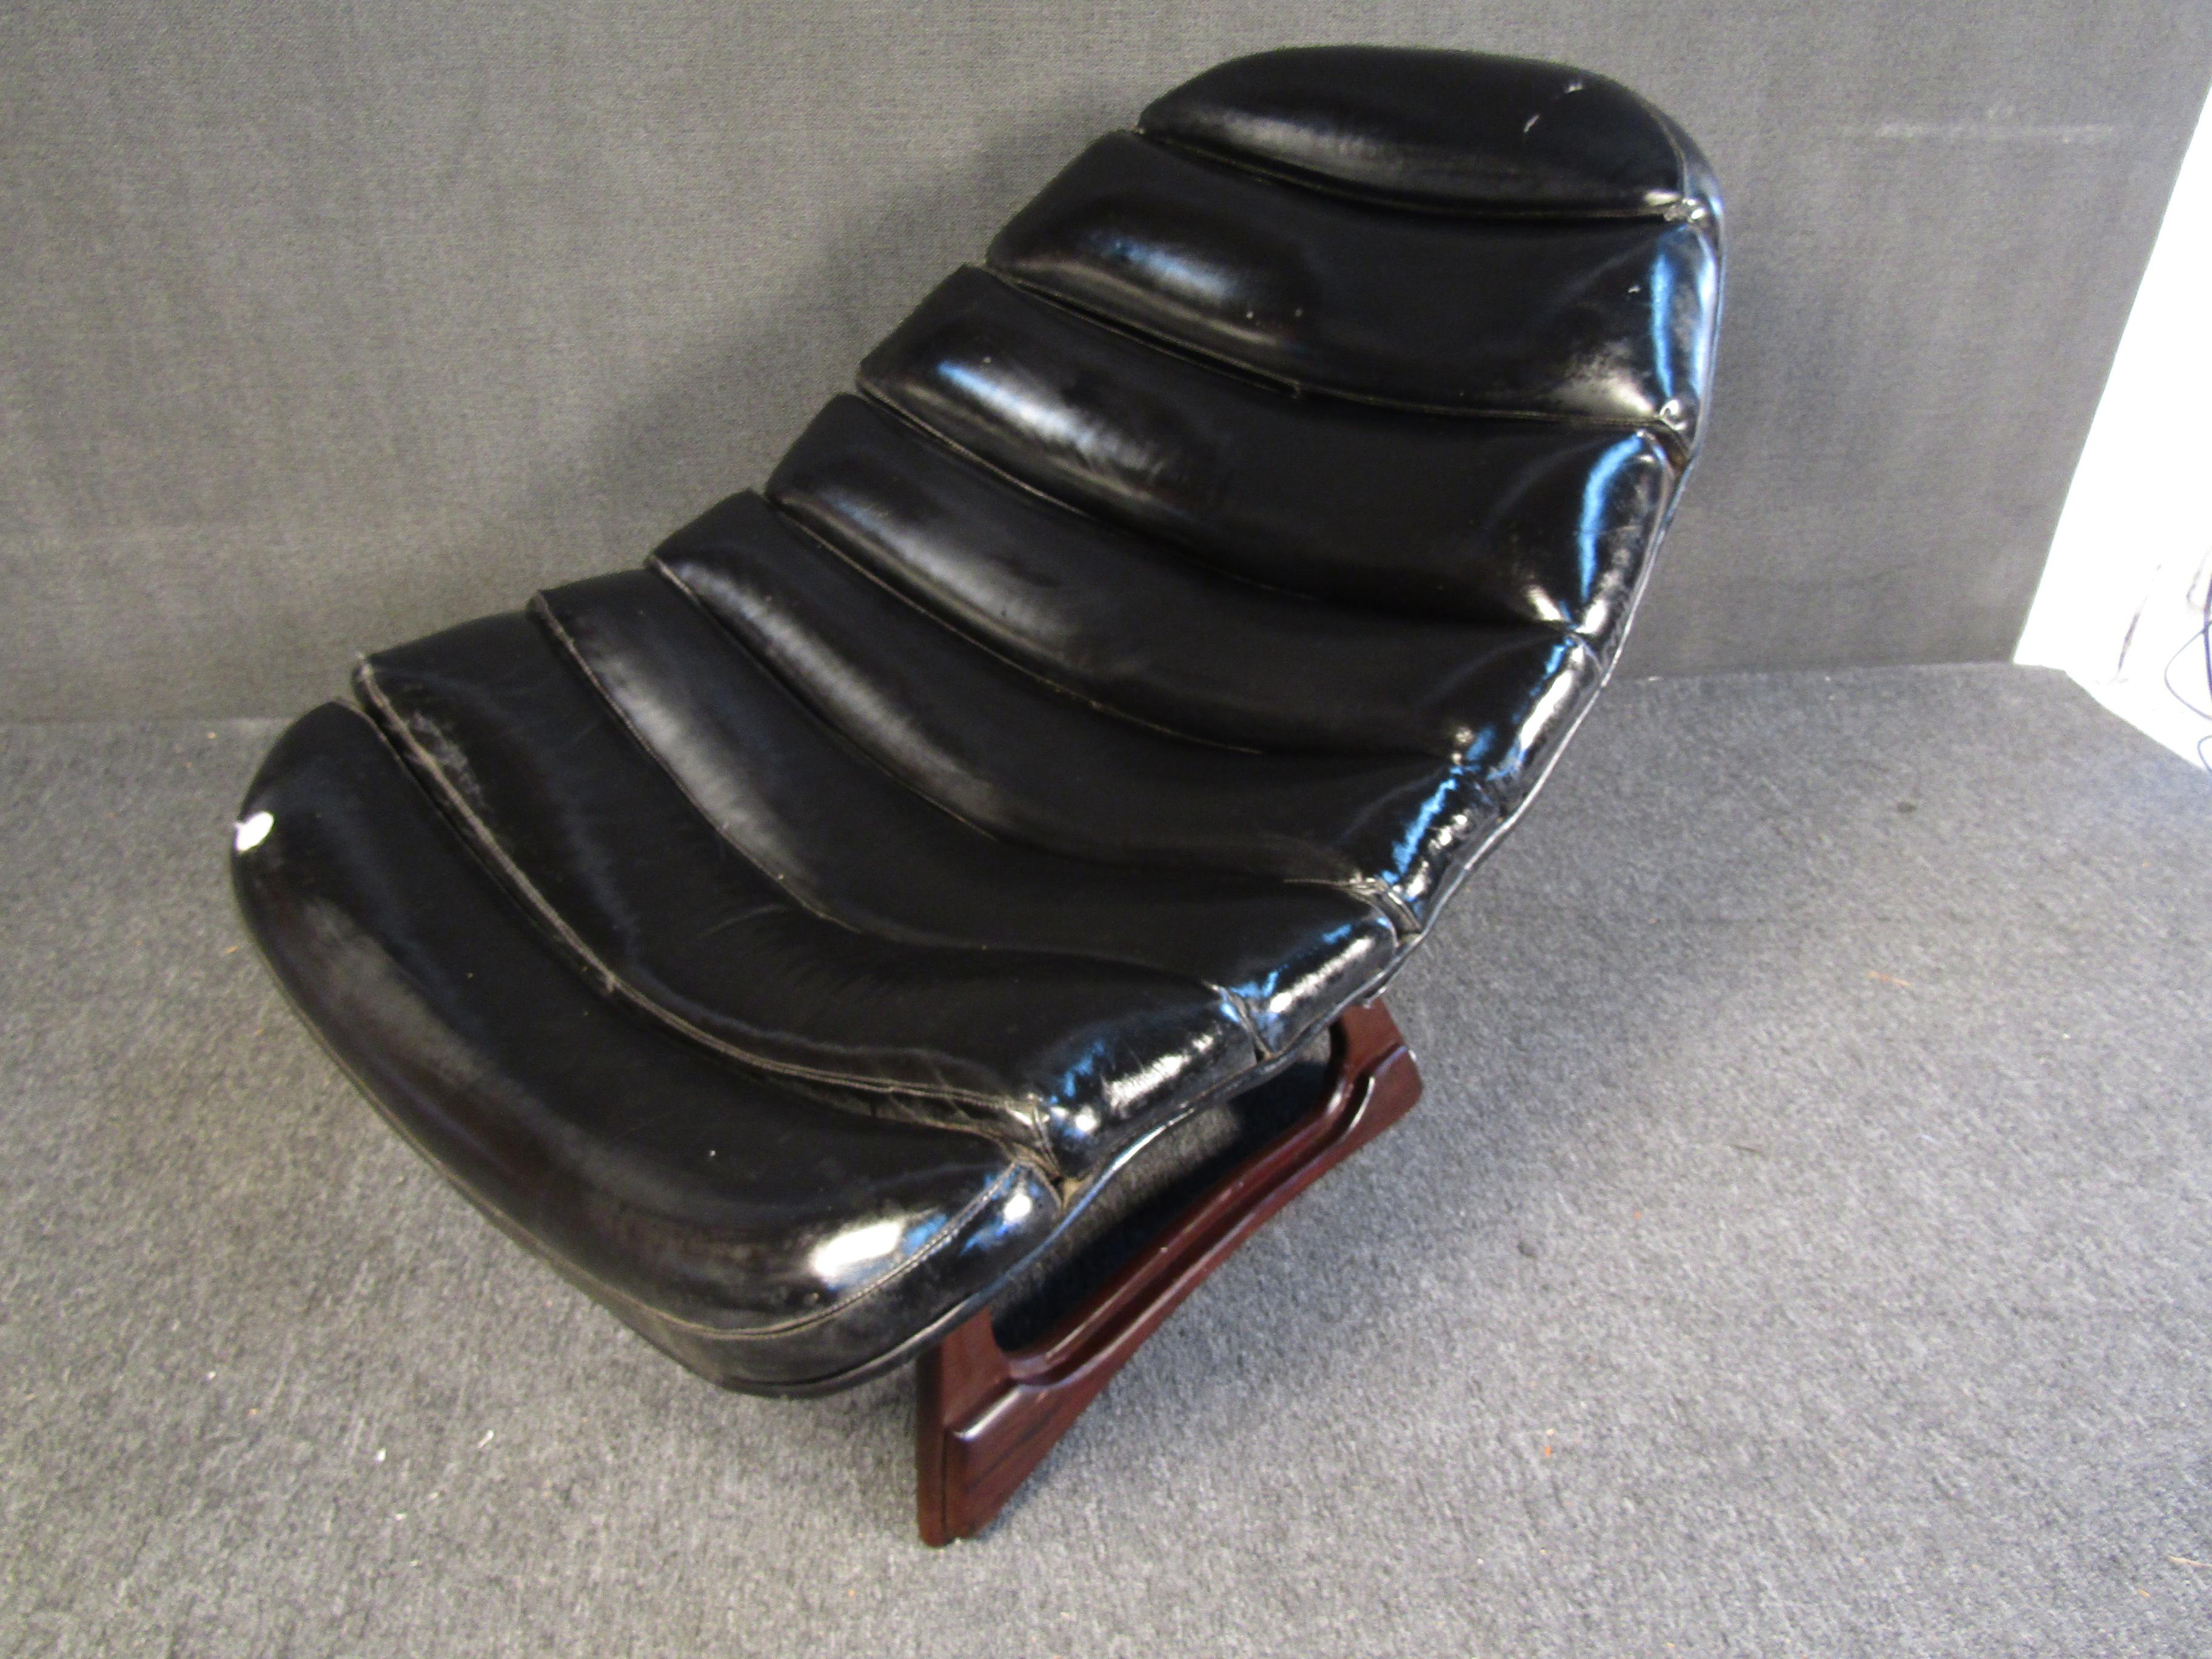 An iconic design by Adrian Pearsall, this Mid-Century Modern lounge chair features sleek black leather and rich walnut bases. This eye-catching chair is perfect for adding bold mid-century flair to any home. Please confirm item location with seller